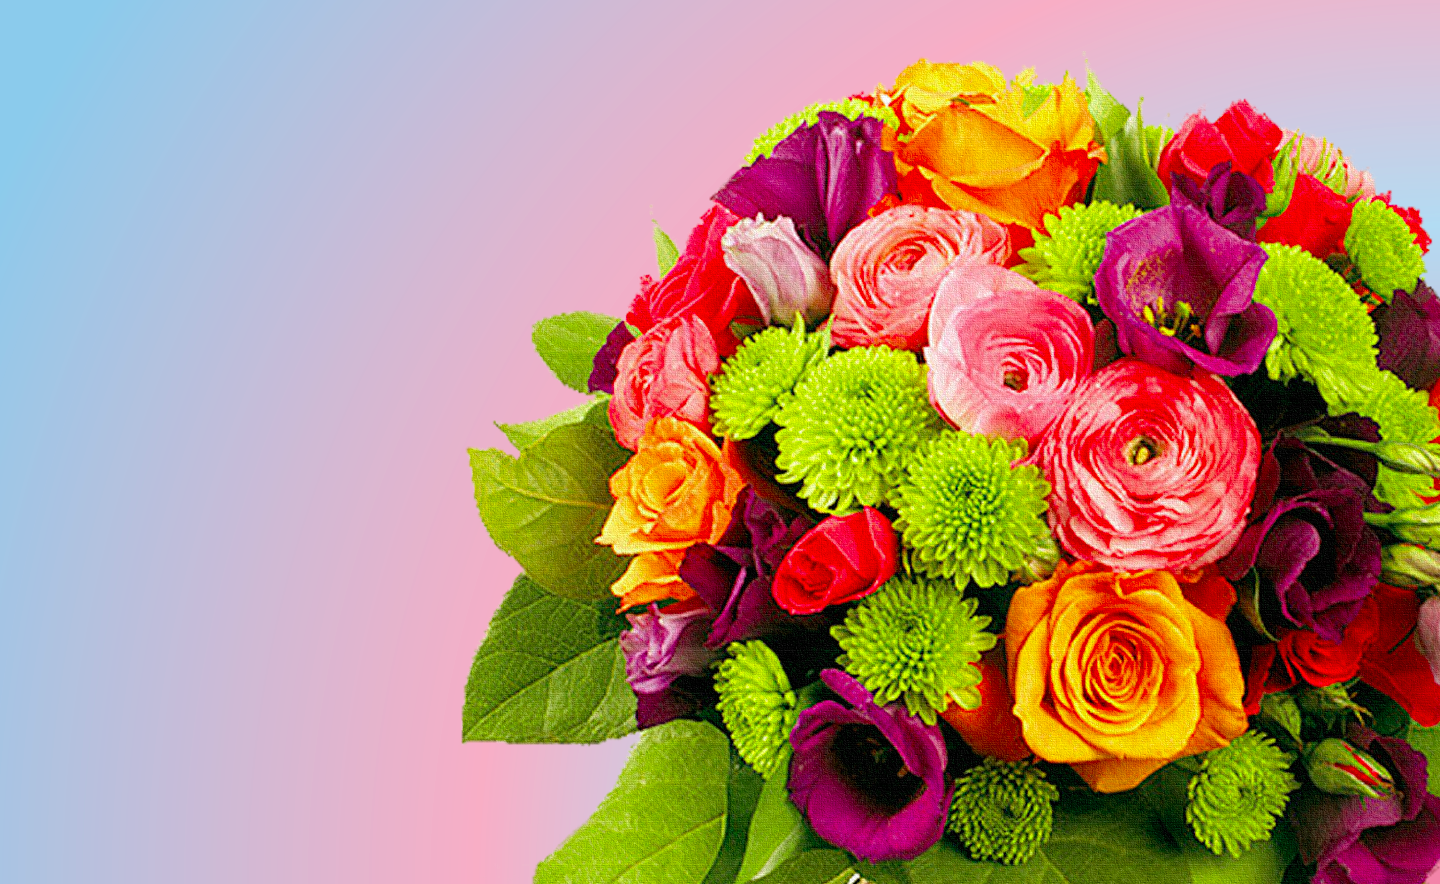 Free Delivery Of Flowers In Calgary And Alberta Chinook Florist Calgary Leading Calgary Florists Just Another Network Site